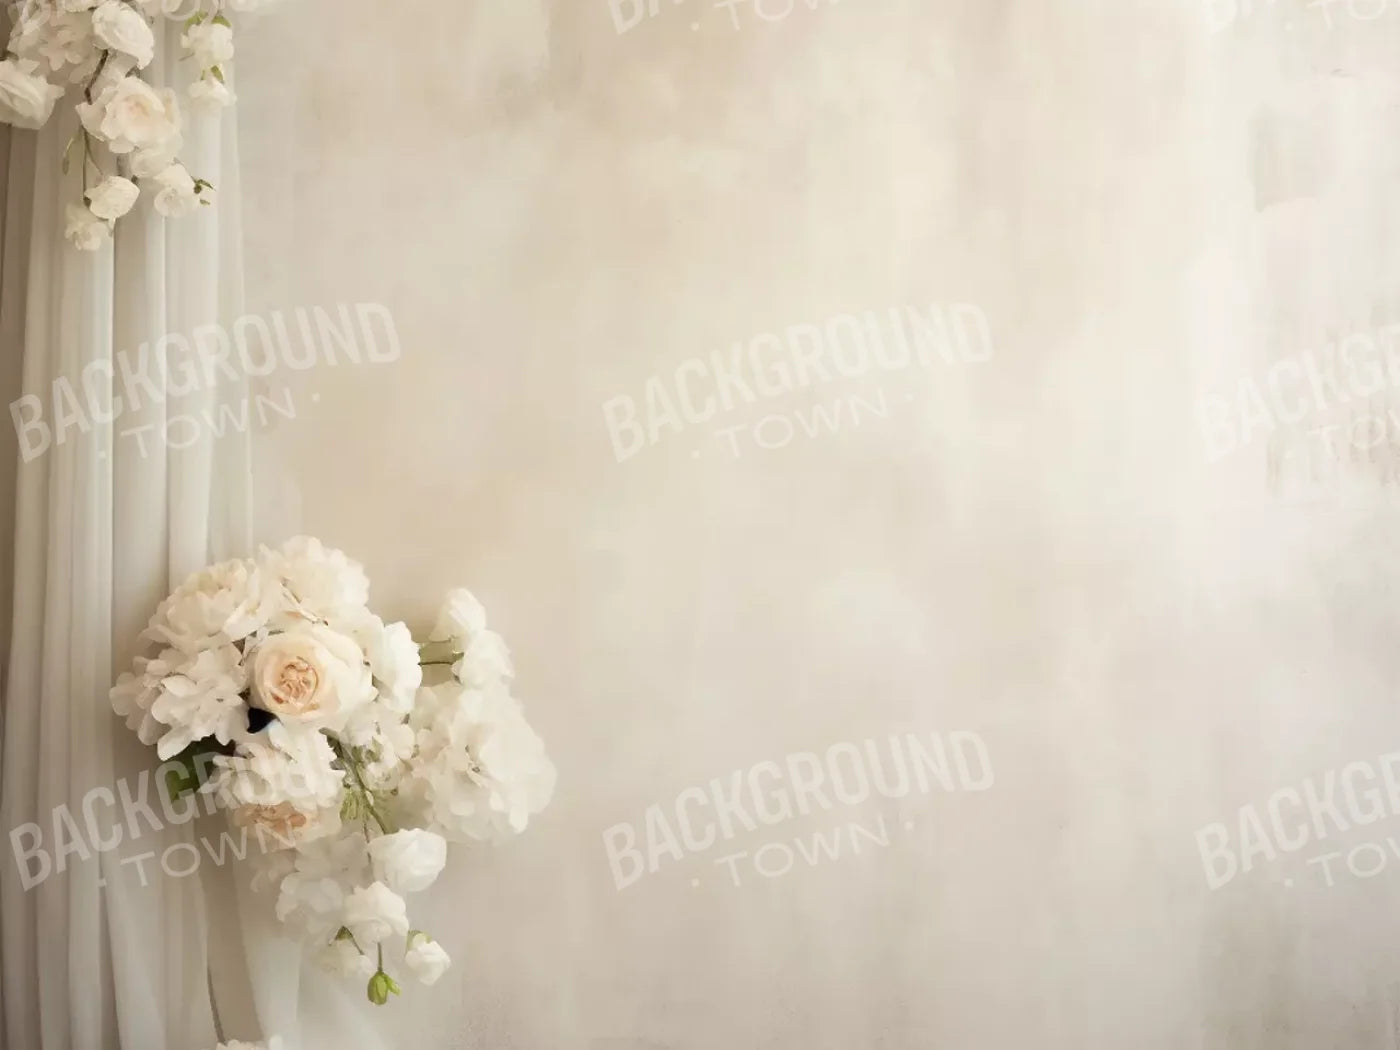 Plaster Wall With Florals 6’8X5’ Fleece (80 X 60 Inch) Backdrop